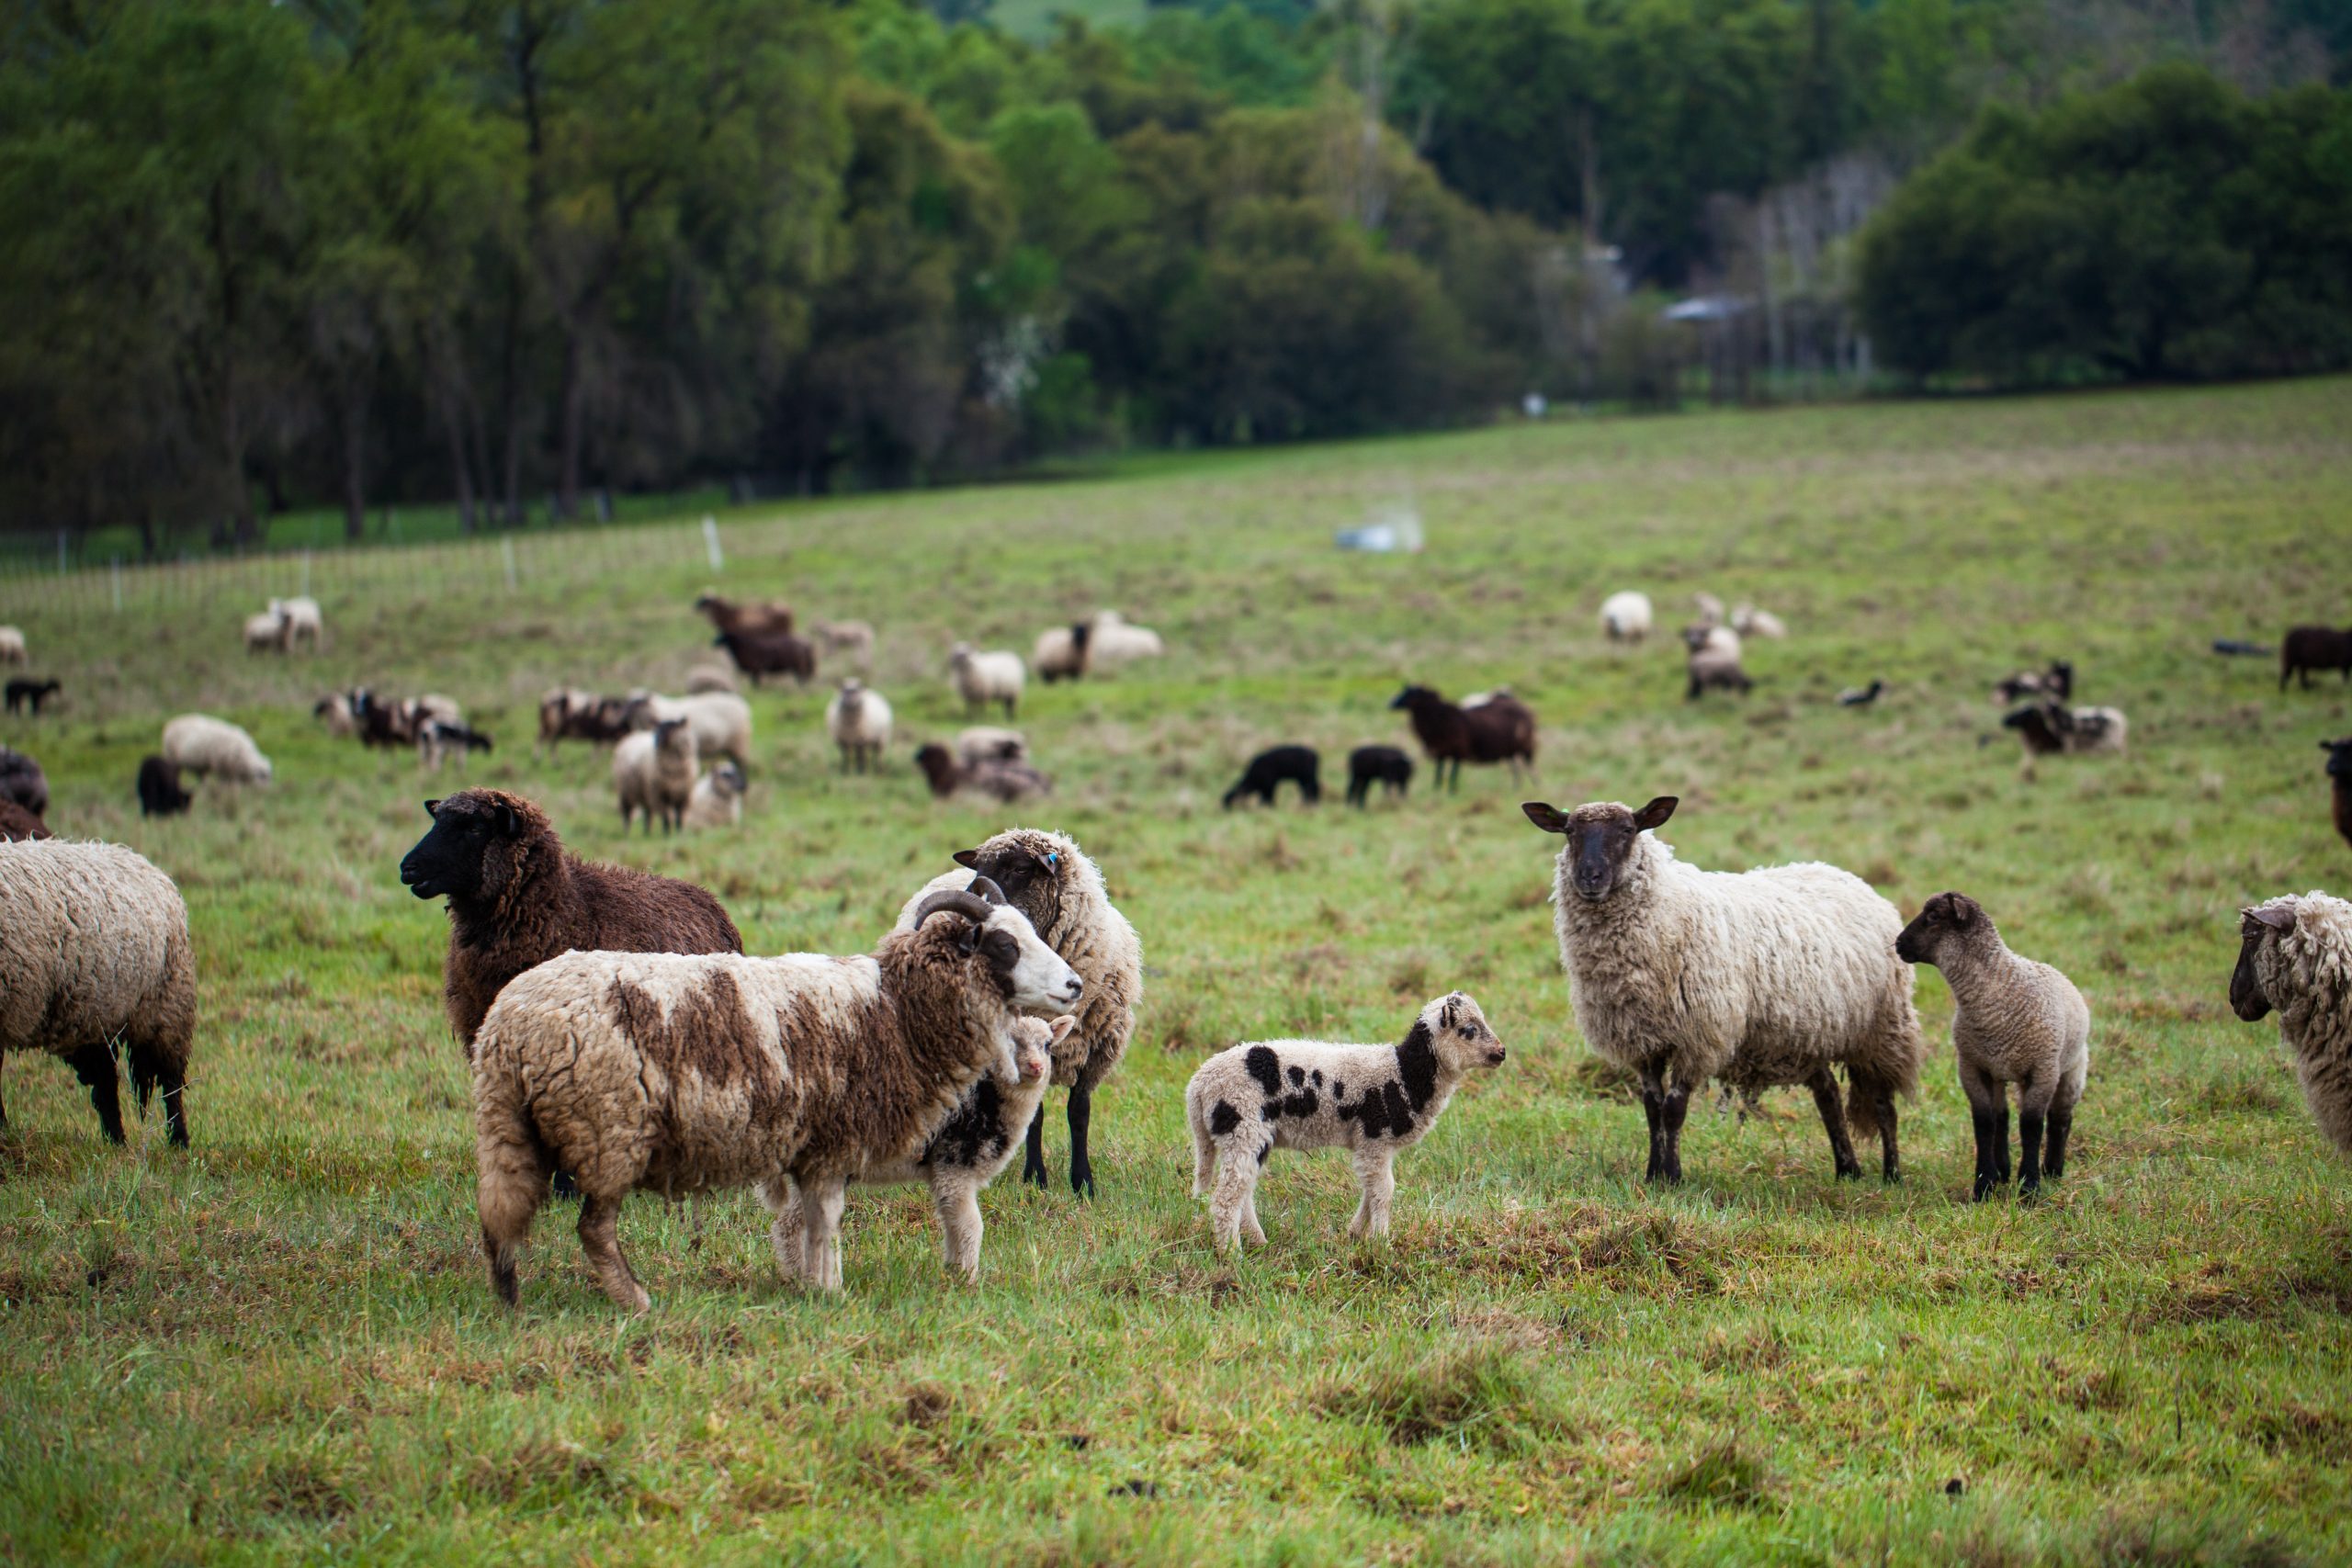 photograph-of-black-and-white-sheep-in-a-verdant-green-pasture